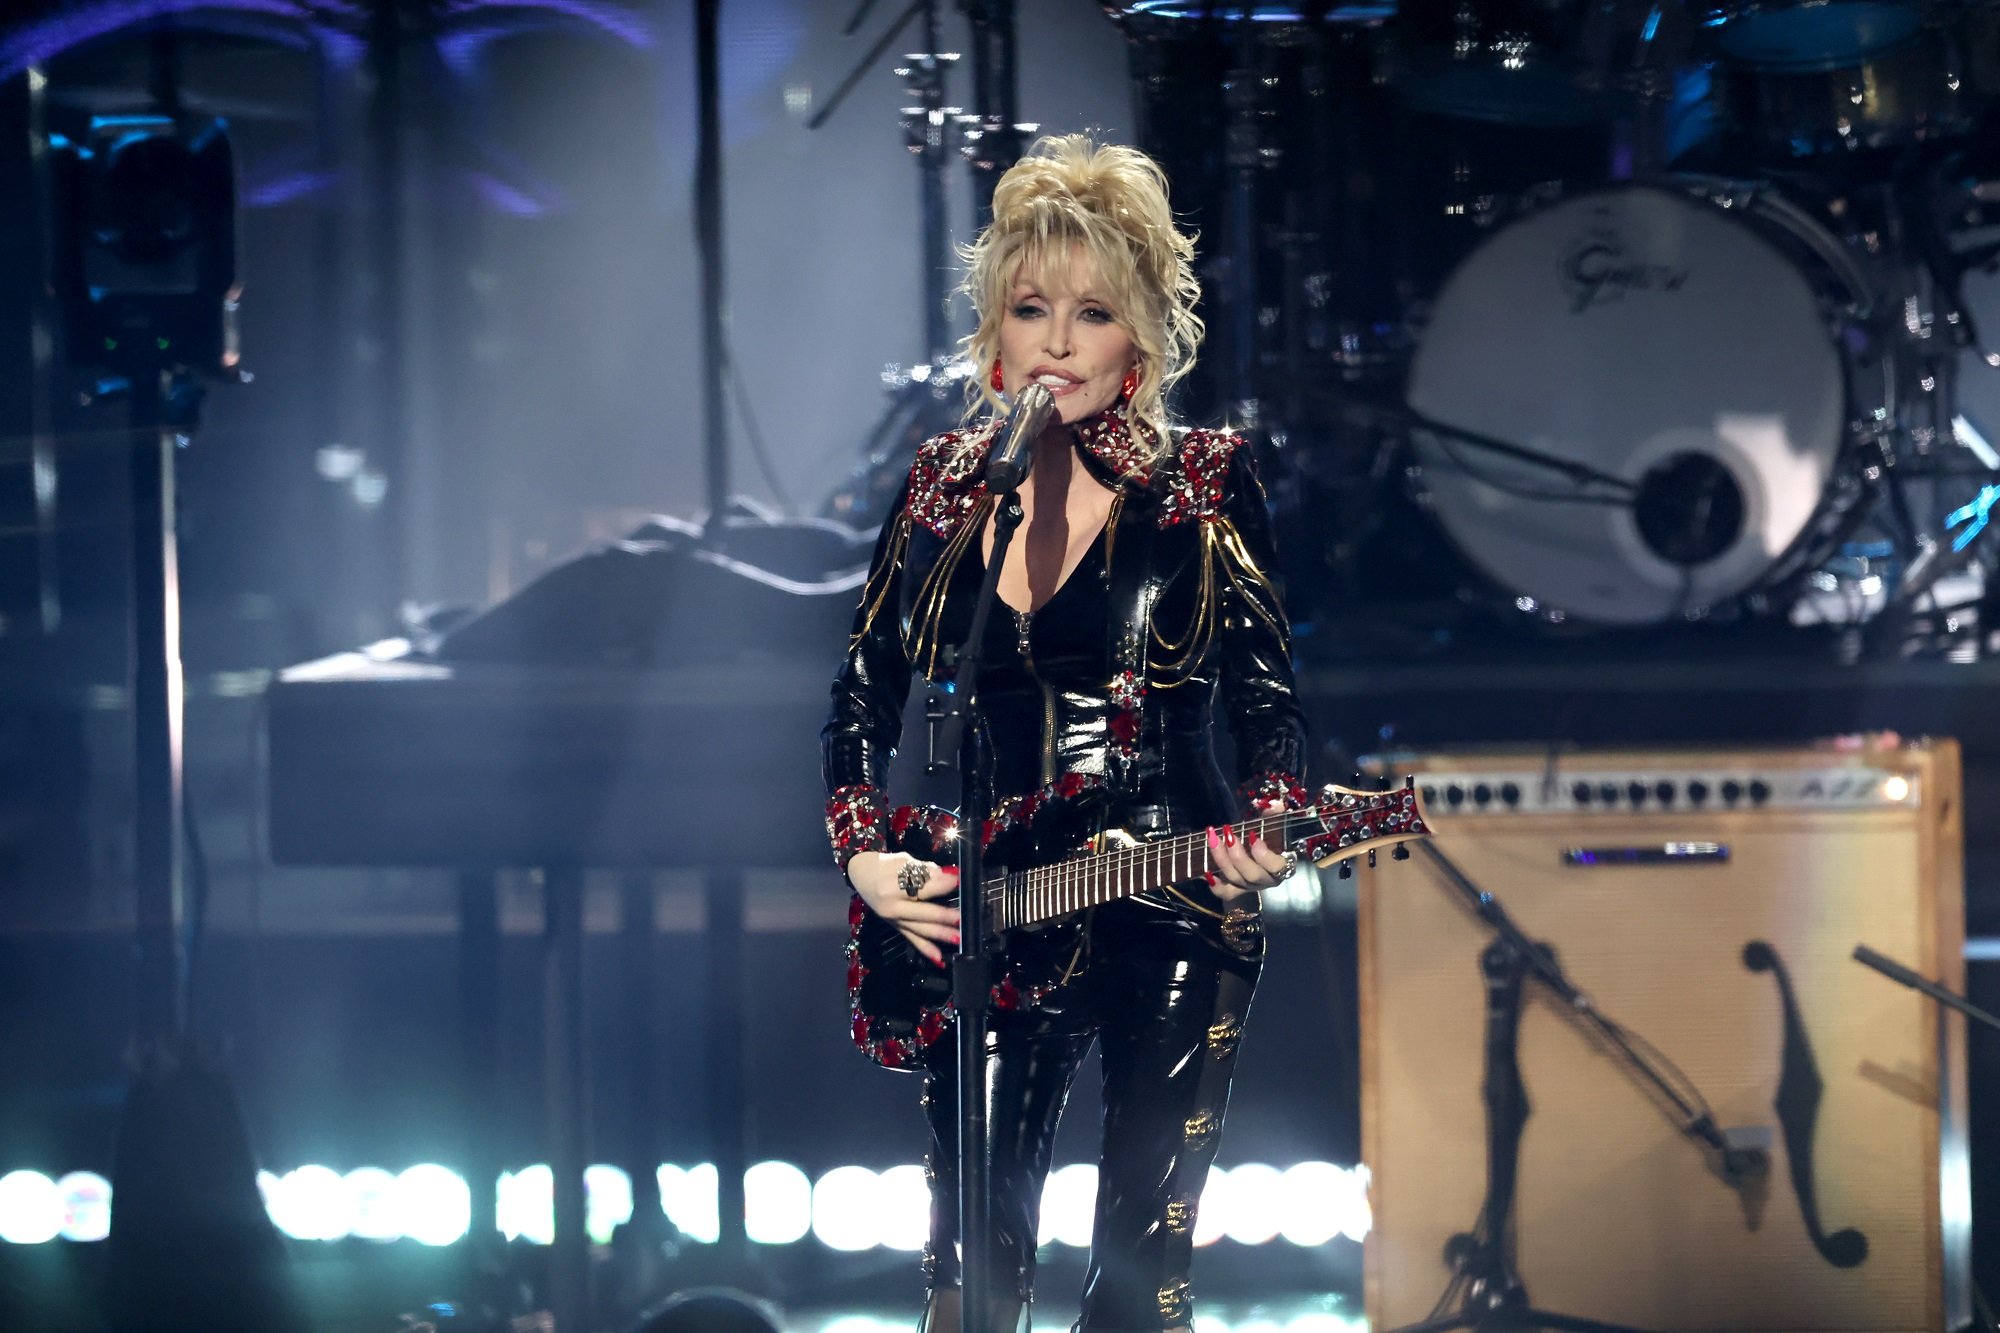 Dolly Parton performs on stage with a guitar while wearing a black leather outfit